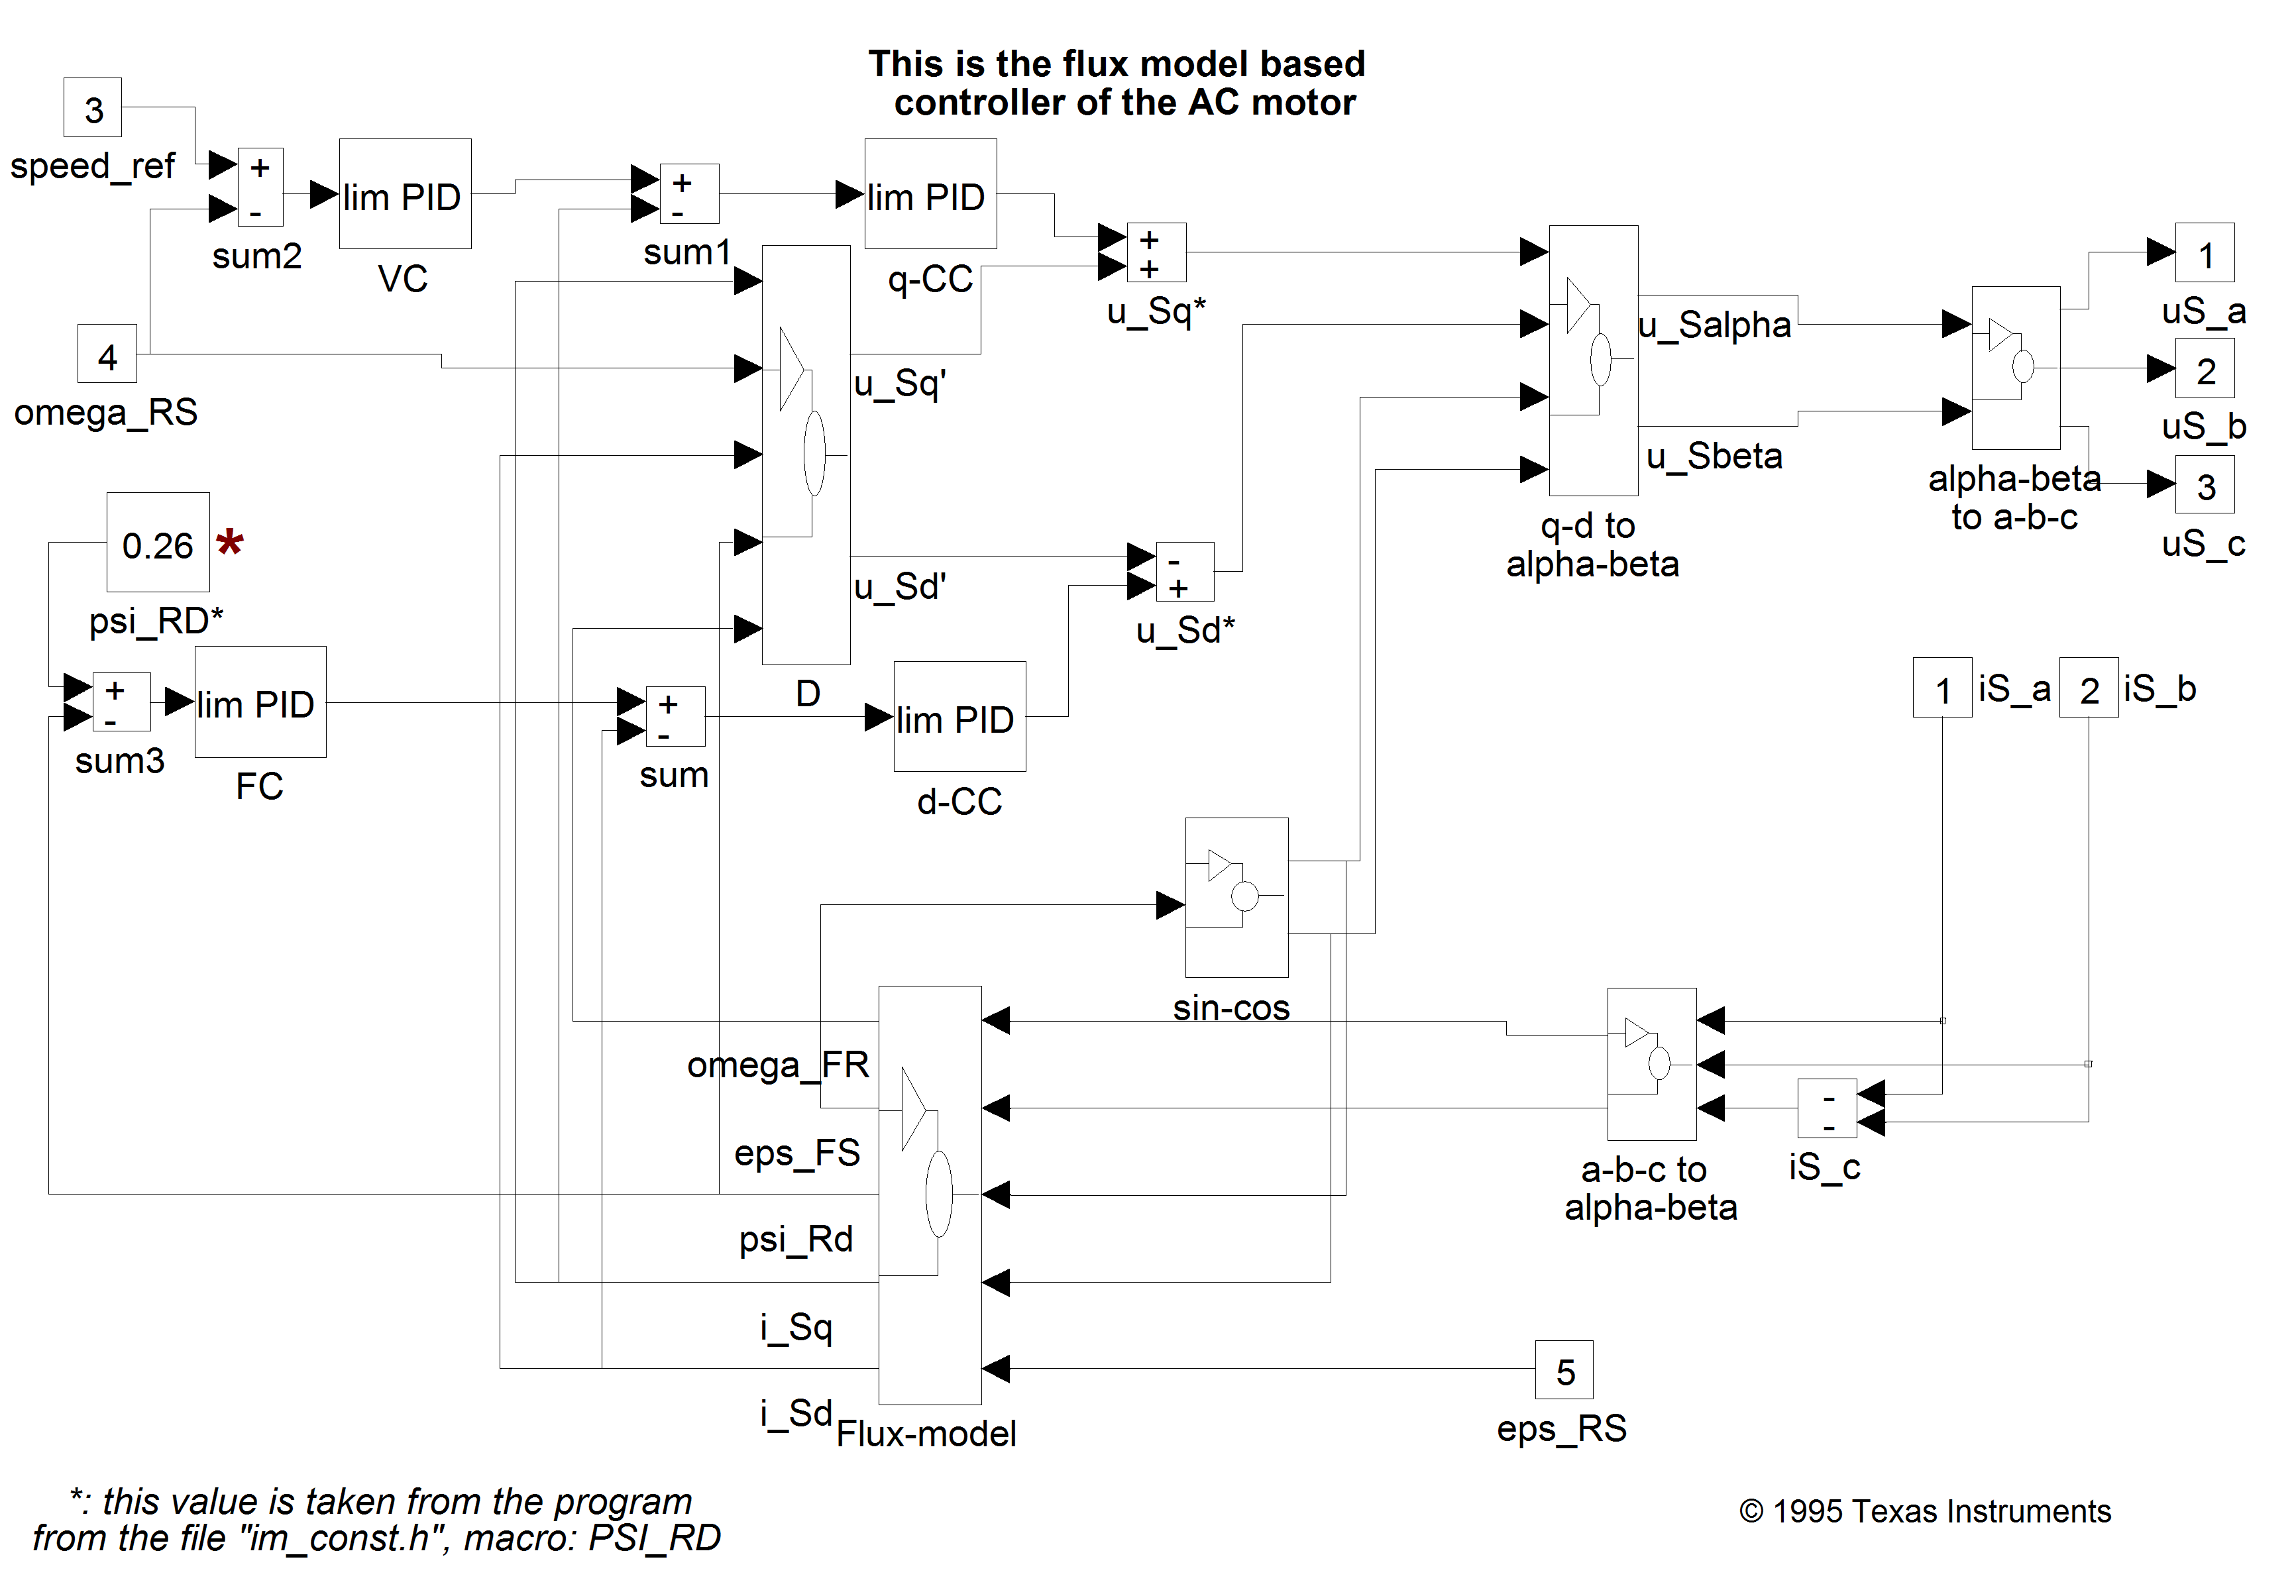 SIMULINK implementation of the FOC control block